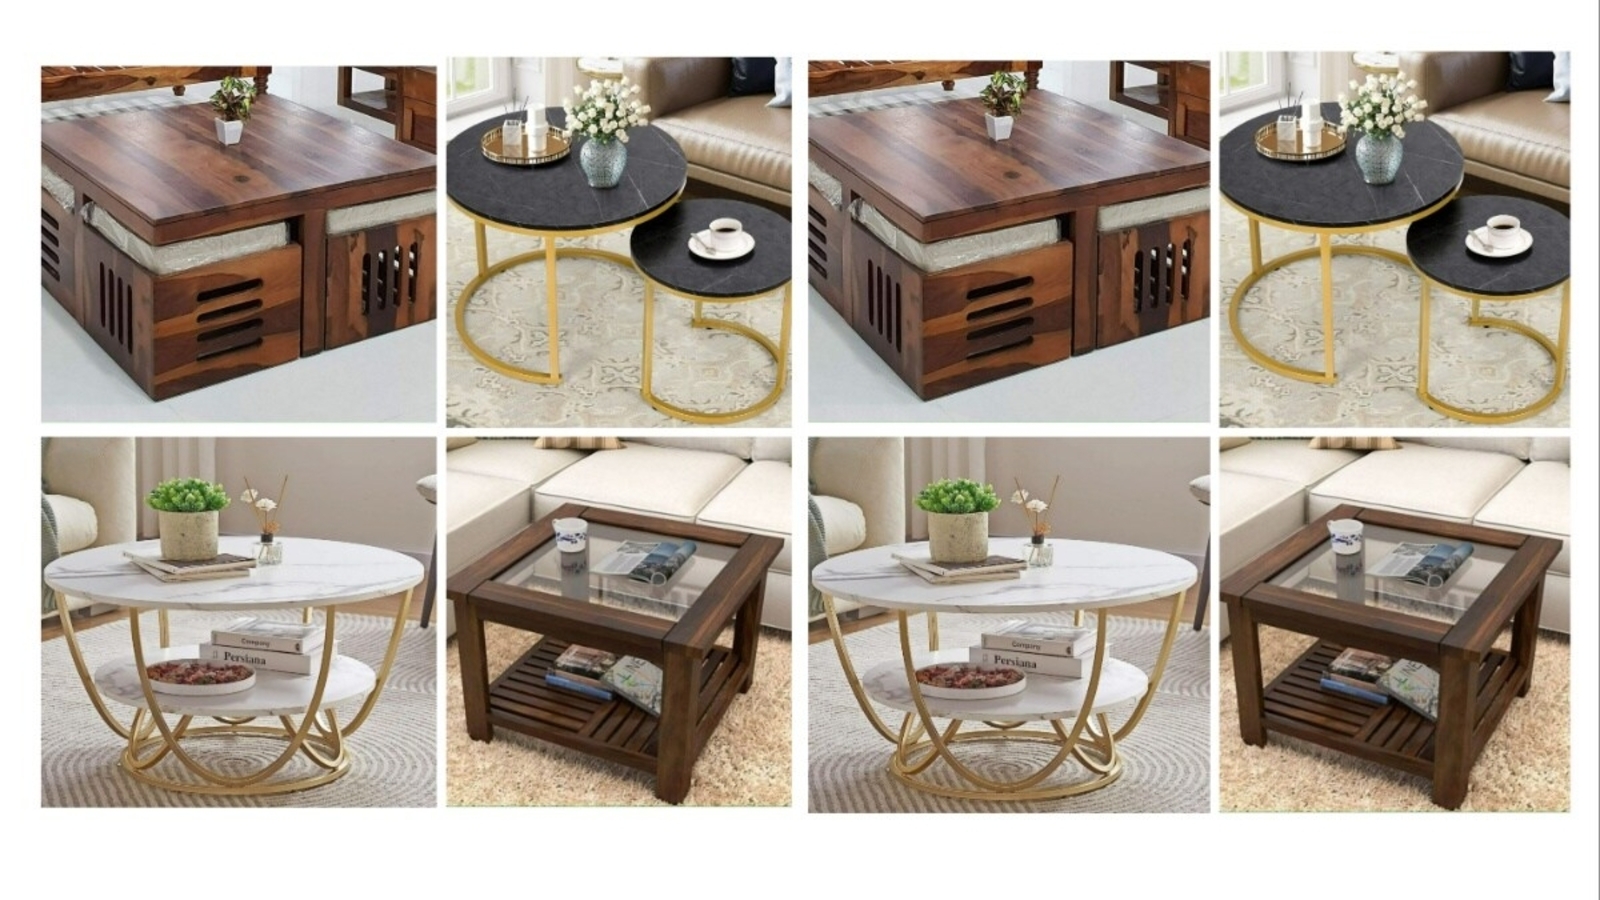 Best coffee tables for living room: Add glamour and utility in equal measure with our top 10 options